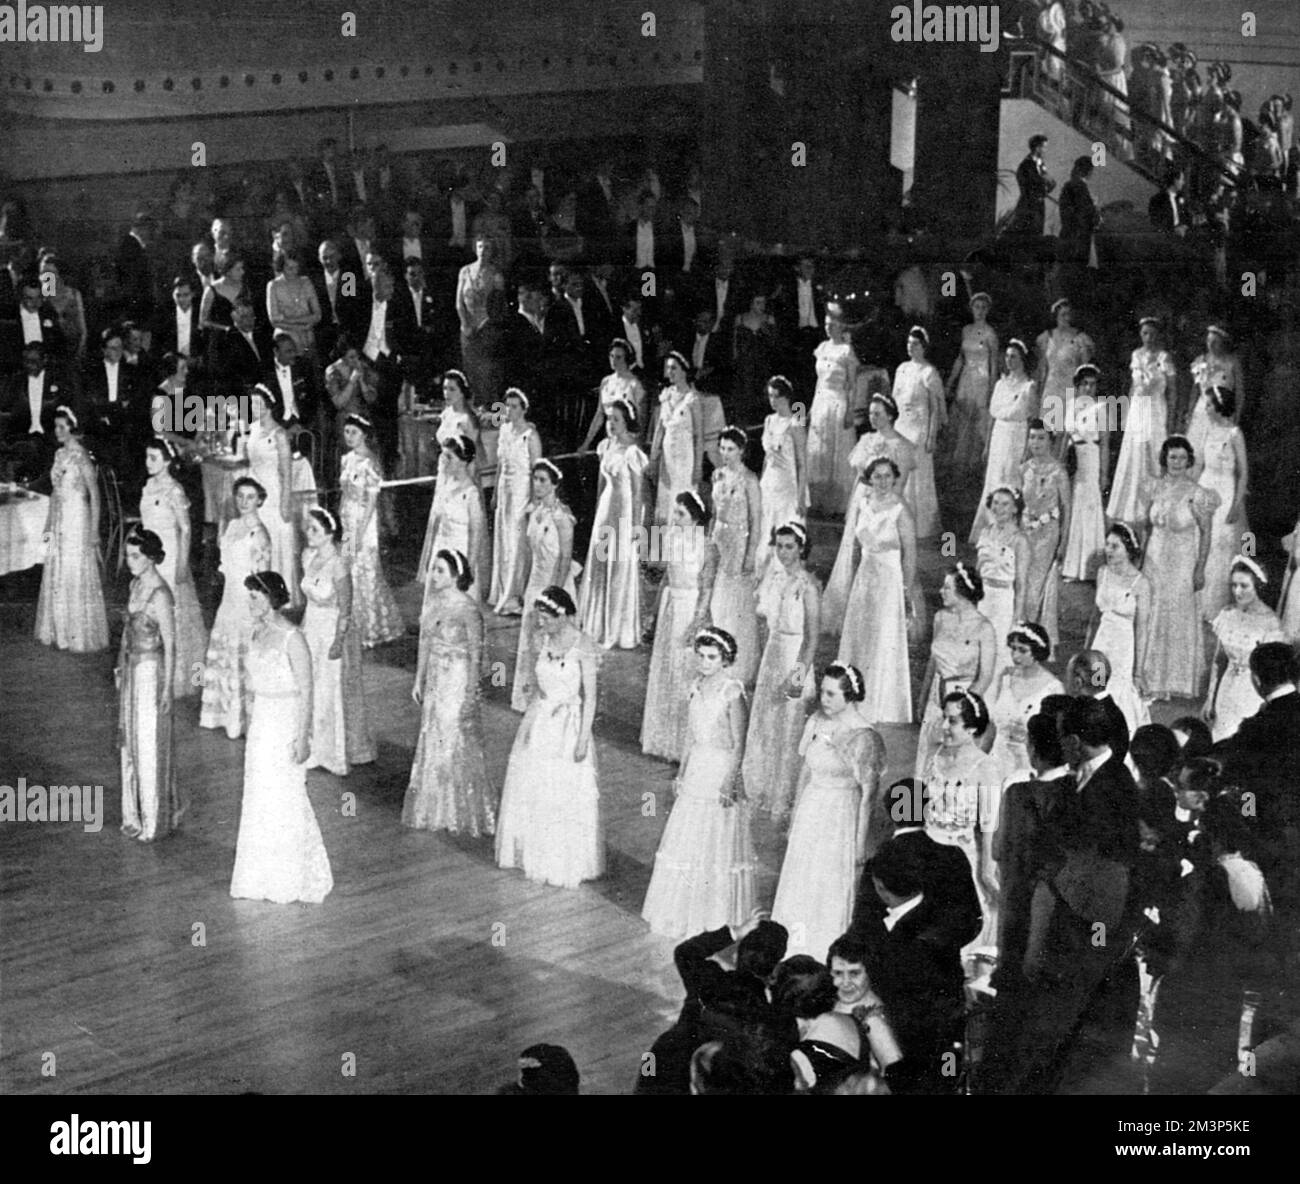 Gleaming in serried ranks: debutantes parading on the ballroom floor during Queen Charlotte's Ball before the traditional cutting of the cake, carried out in that Coronation year by the Duchess of Kent.       Date: 1937 Stock Photo